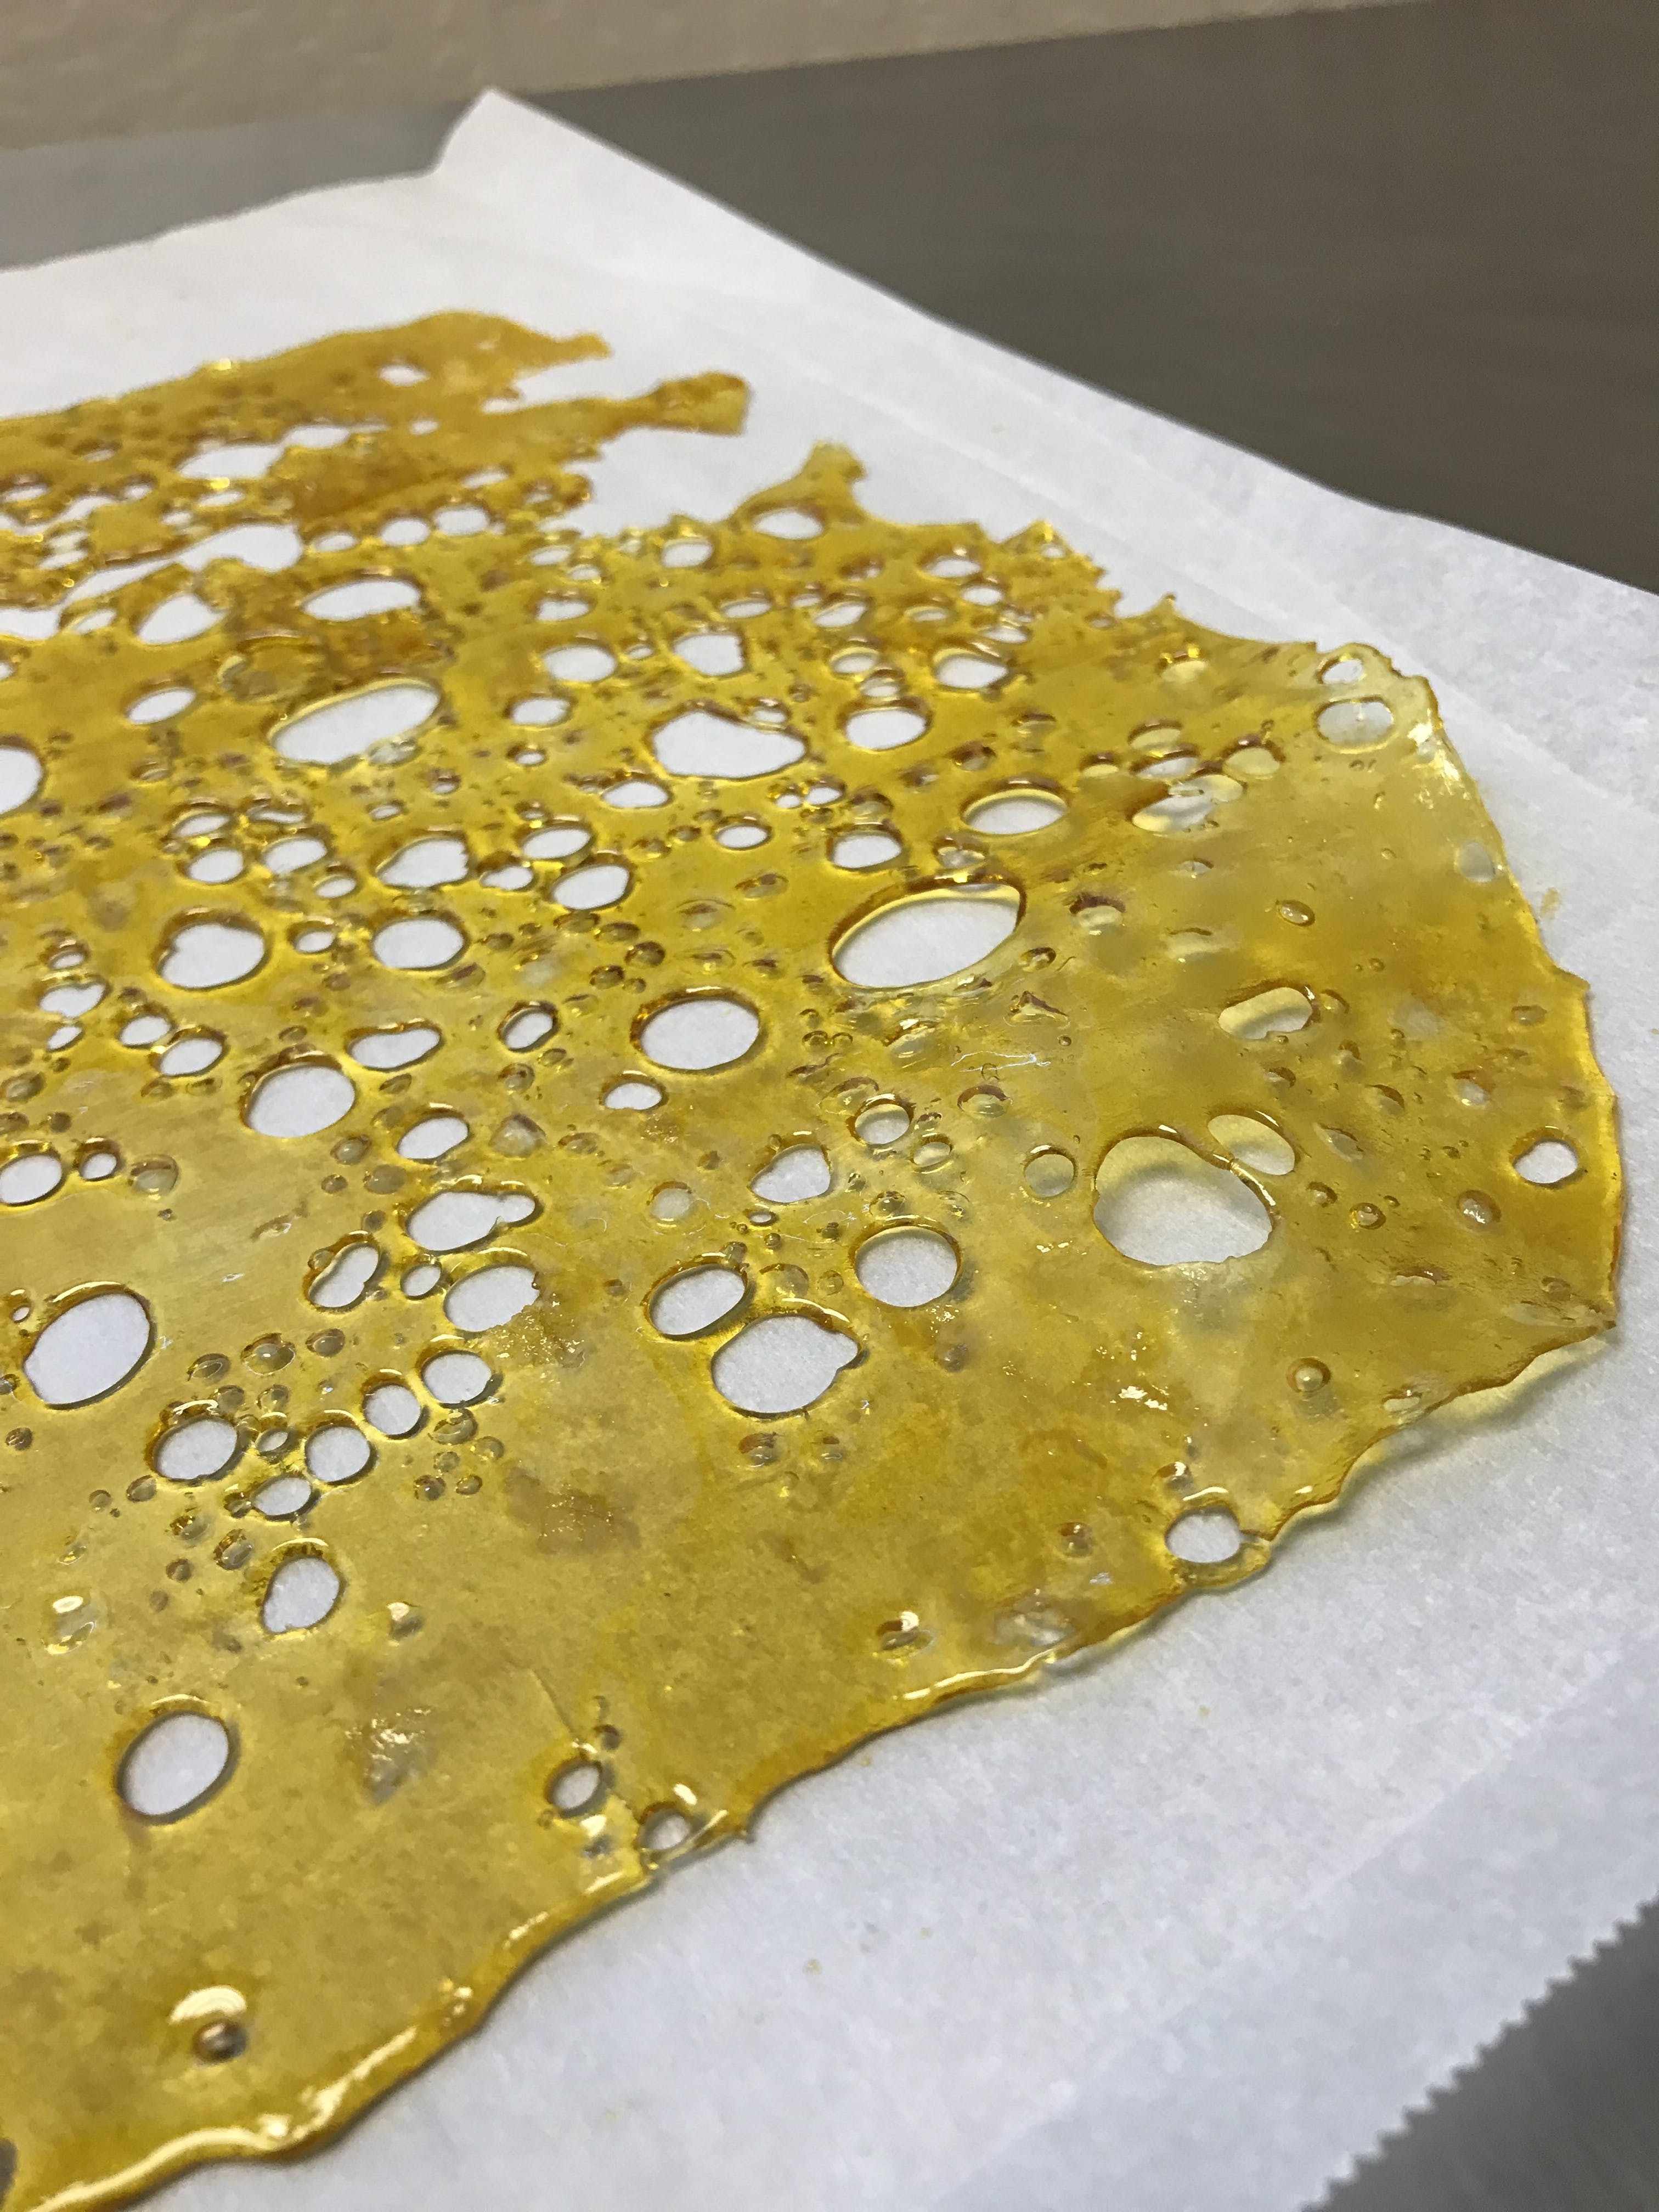 wax-sweet-science-shatter-tier-1-critical-plus-2-0